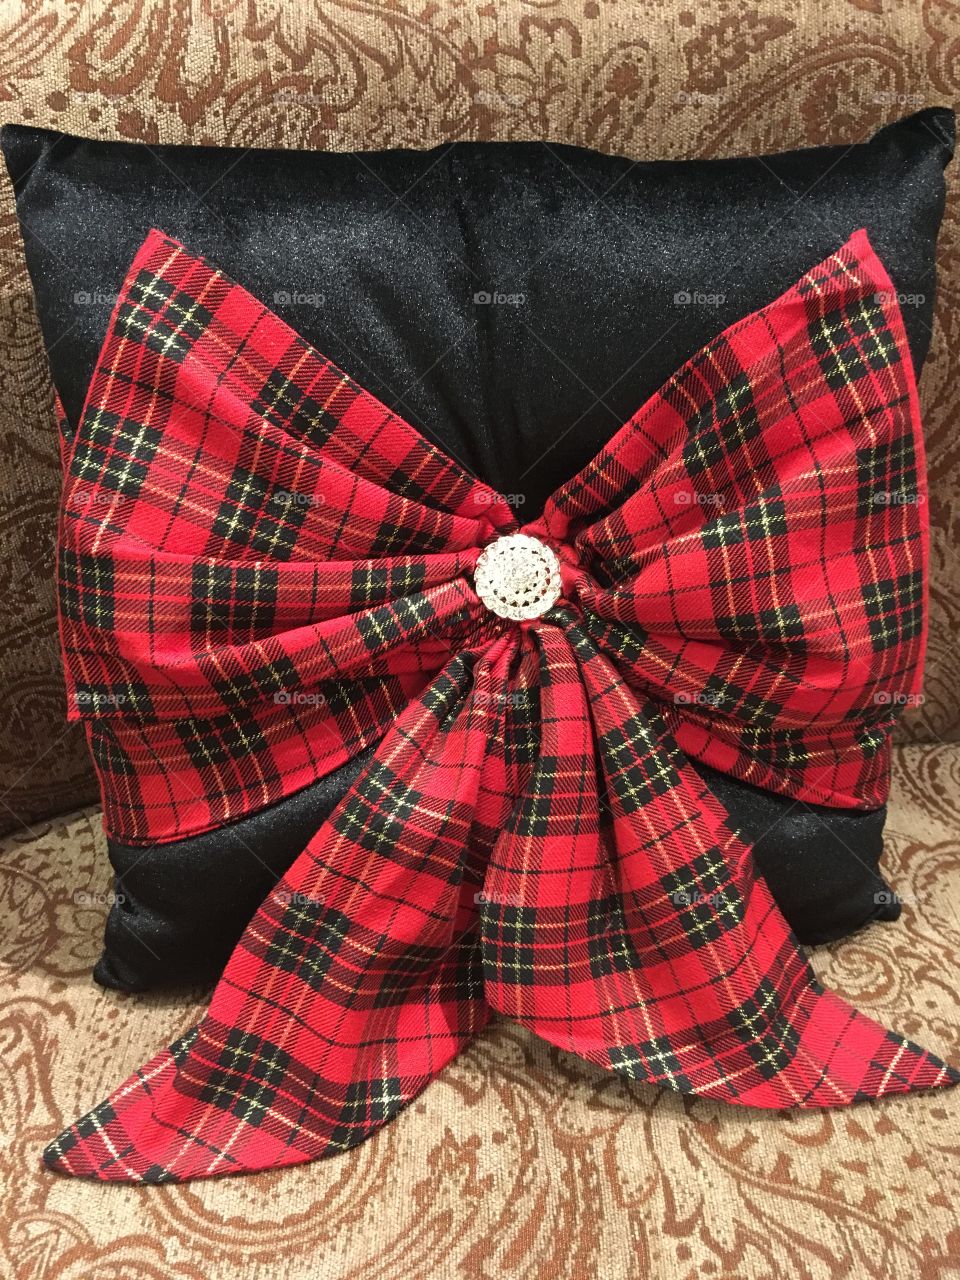 Red bow pillow